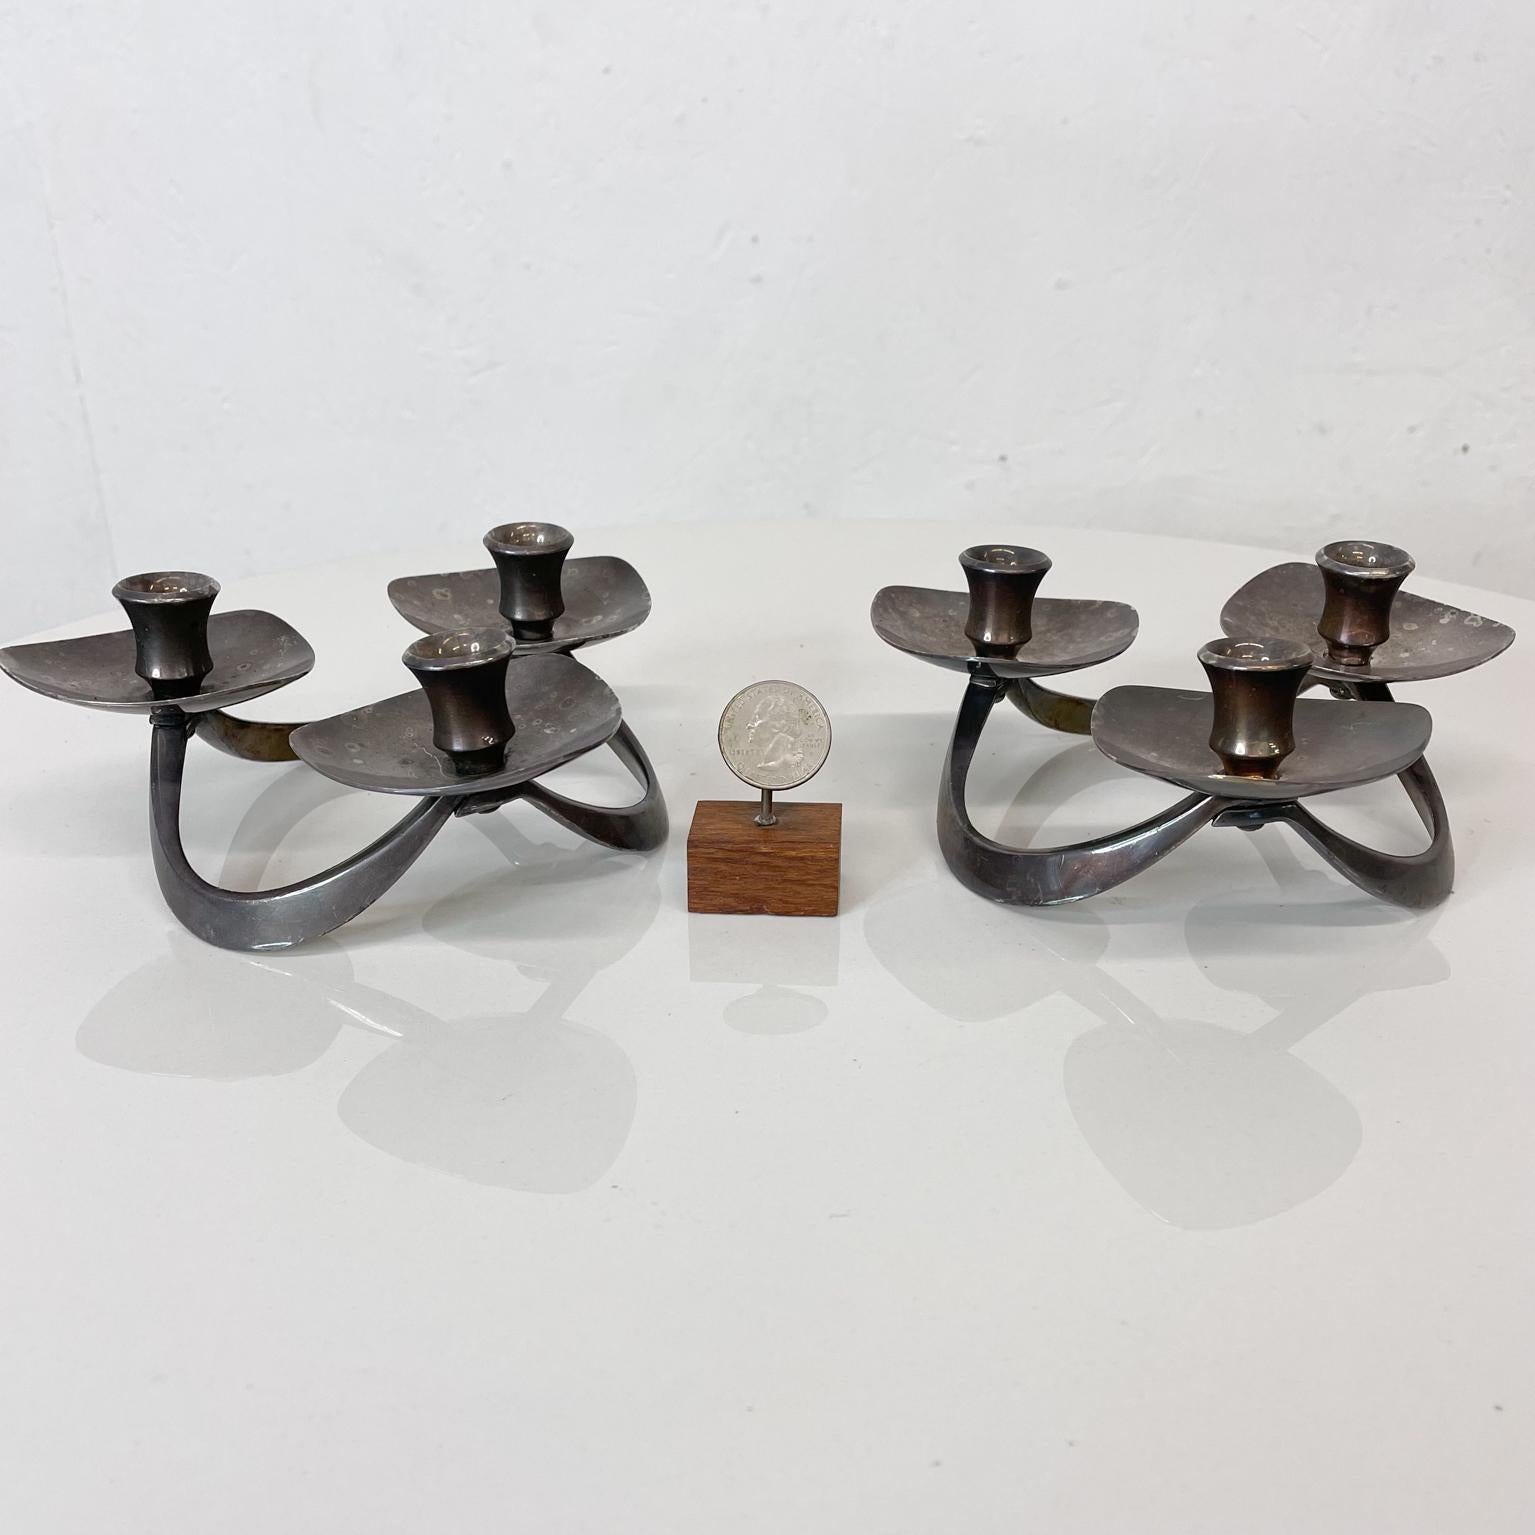 Candleholders by Lunt Silversmiths
Lunt Silversmiths Vintage Silver Plate Candle Holder Pair M-61- Set of 2- Three arm taper Candle Holders.
Midcentury Style Danish Modern 1960s
Made in Greenfield, Massachusetts
Candle diameter is .5